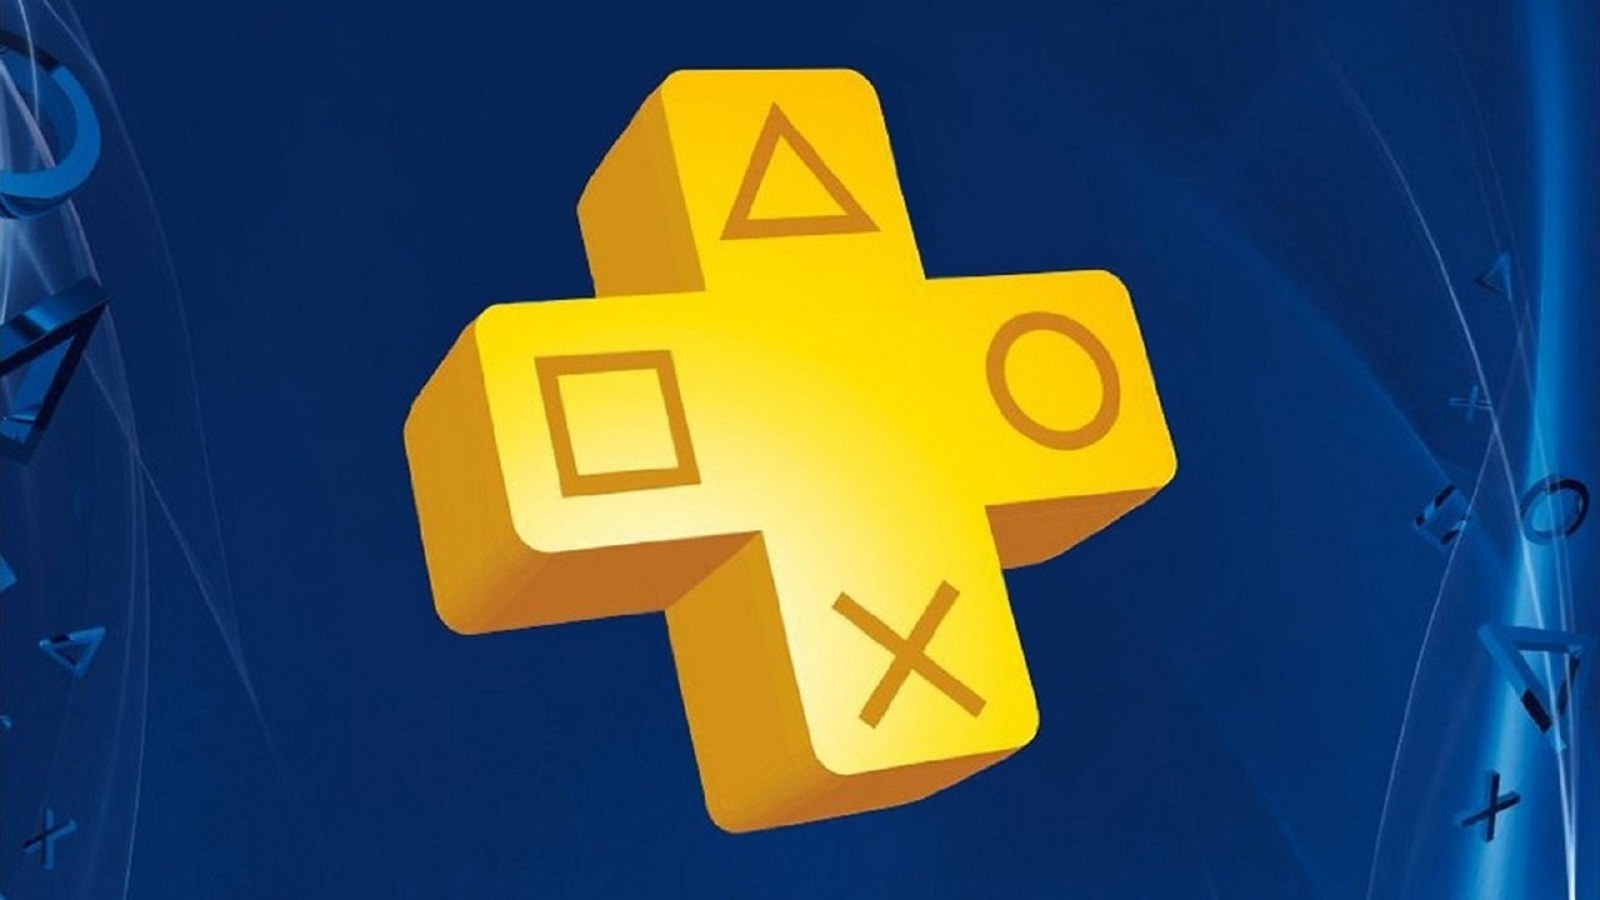 Why is the PlayStation Plus Collection going away just as PS5s became  easier to buy?